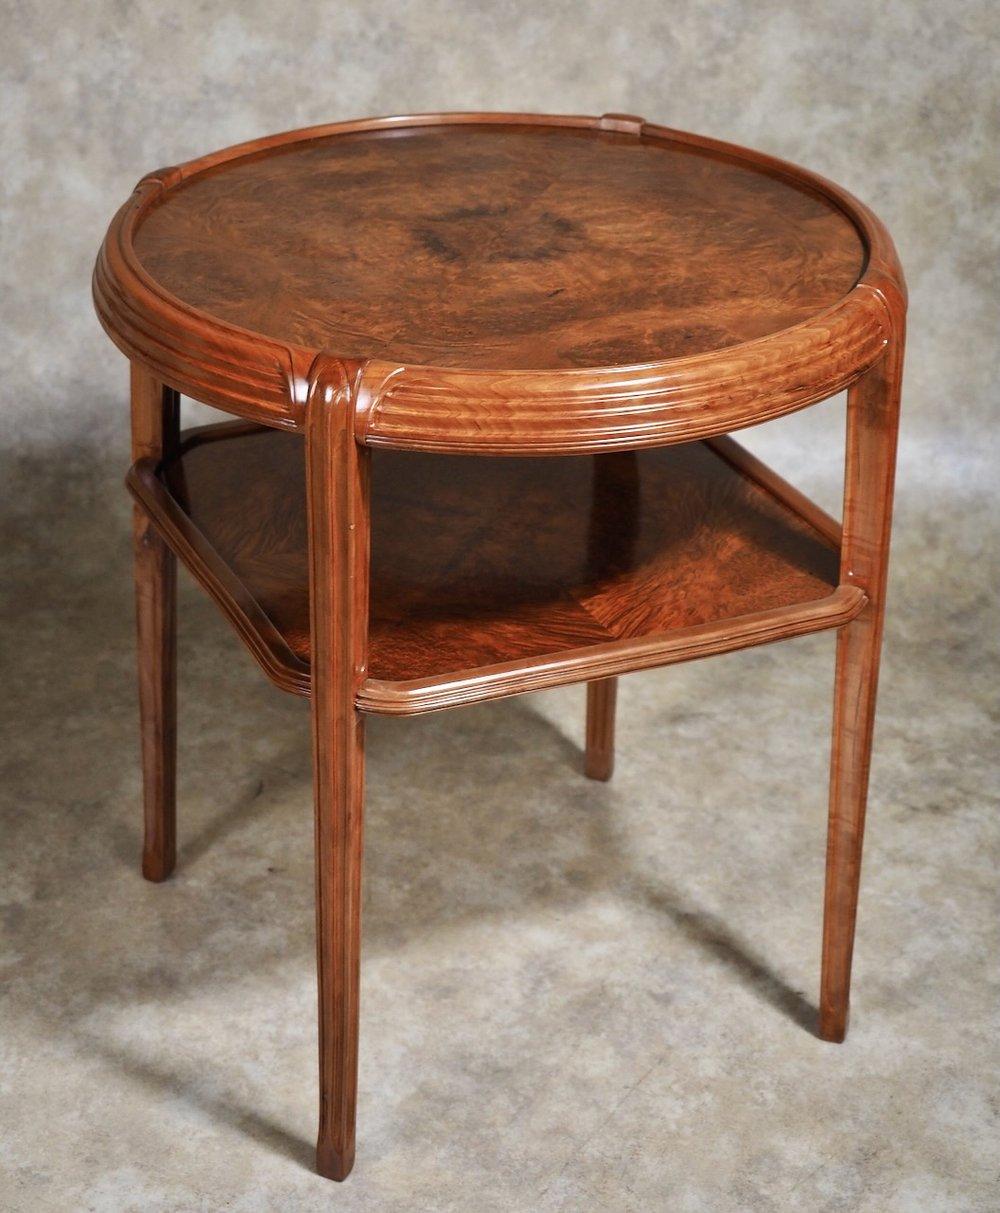 Early French Art Deco (transitional) tiered table by Leon Jallot in pearwood and camphor wood burl, circa 1910-12. 28” diameter x 29” high.

Leon Jallot (1874-1967)

Born in Nantes, July 24, 1874, Leon Jallot studied in Paris but did not go to